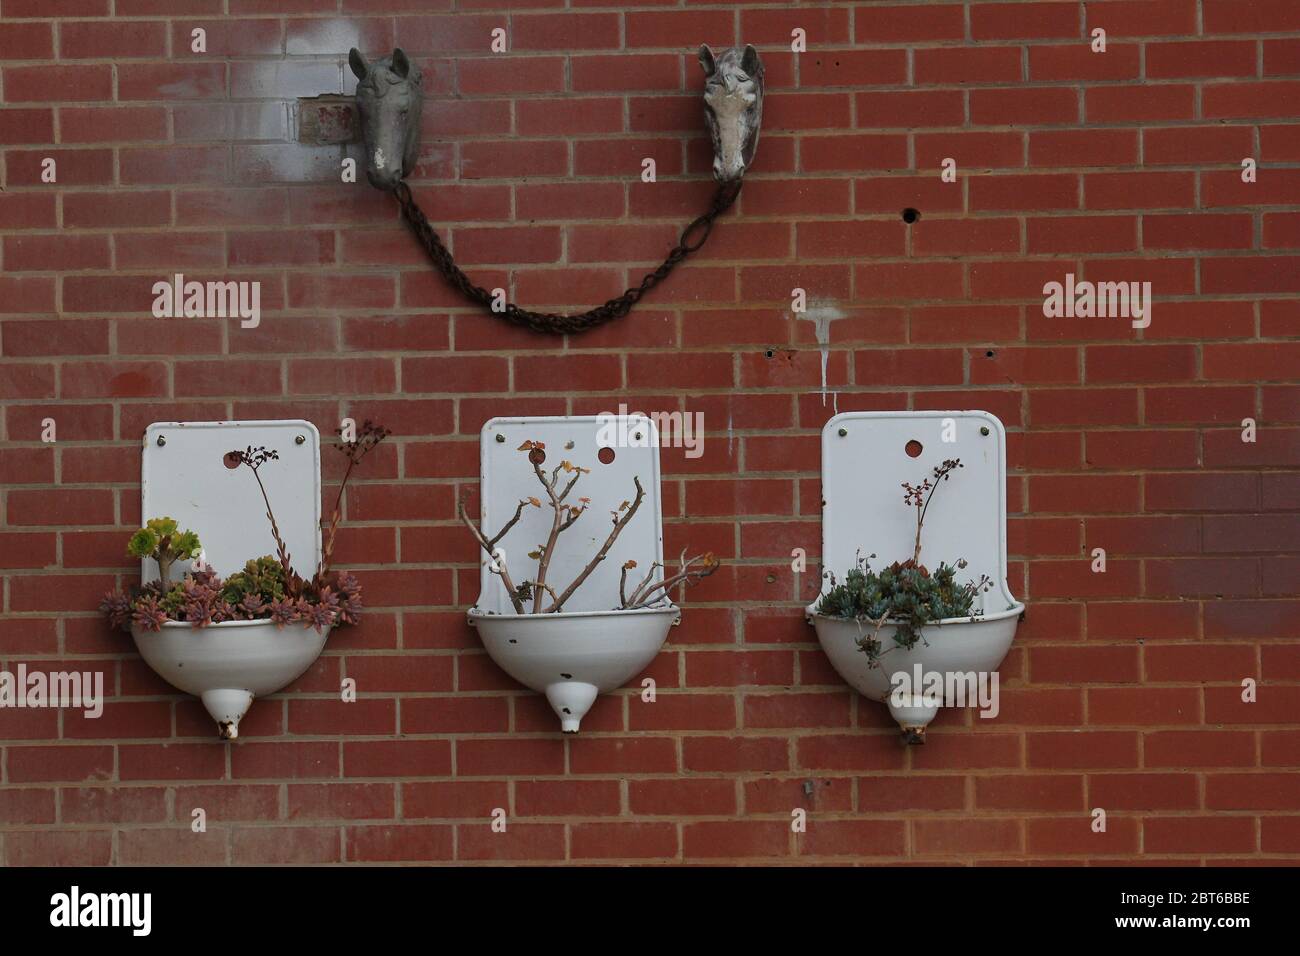 Three decorative water trough or urinals with plants at Castlemaine, Australia. Stock Photo